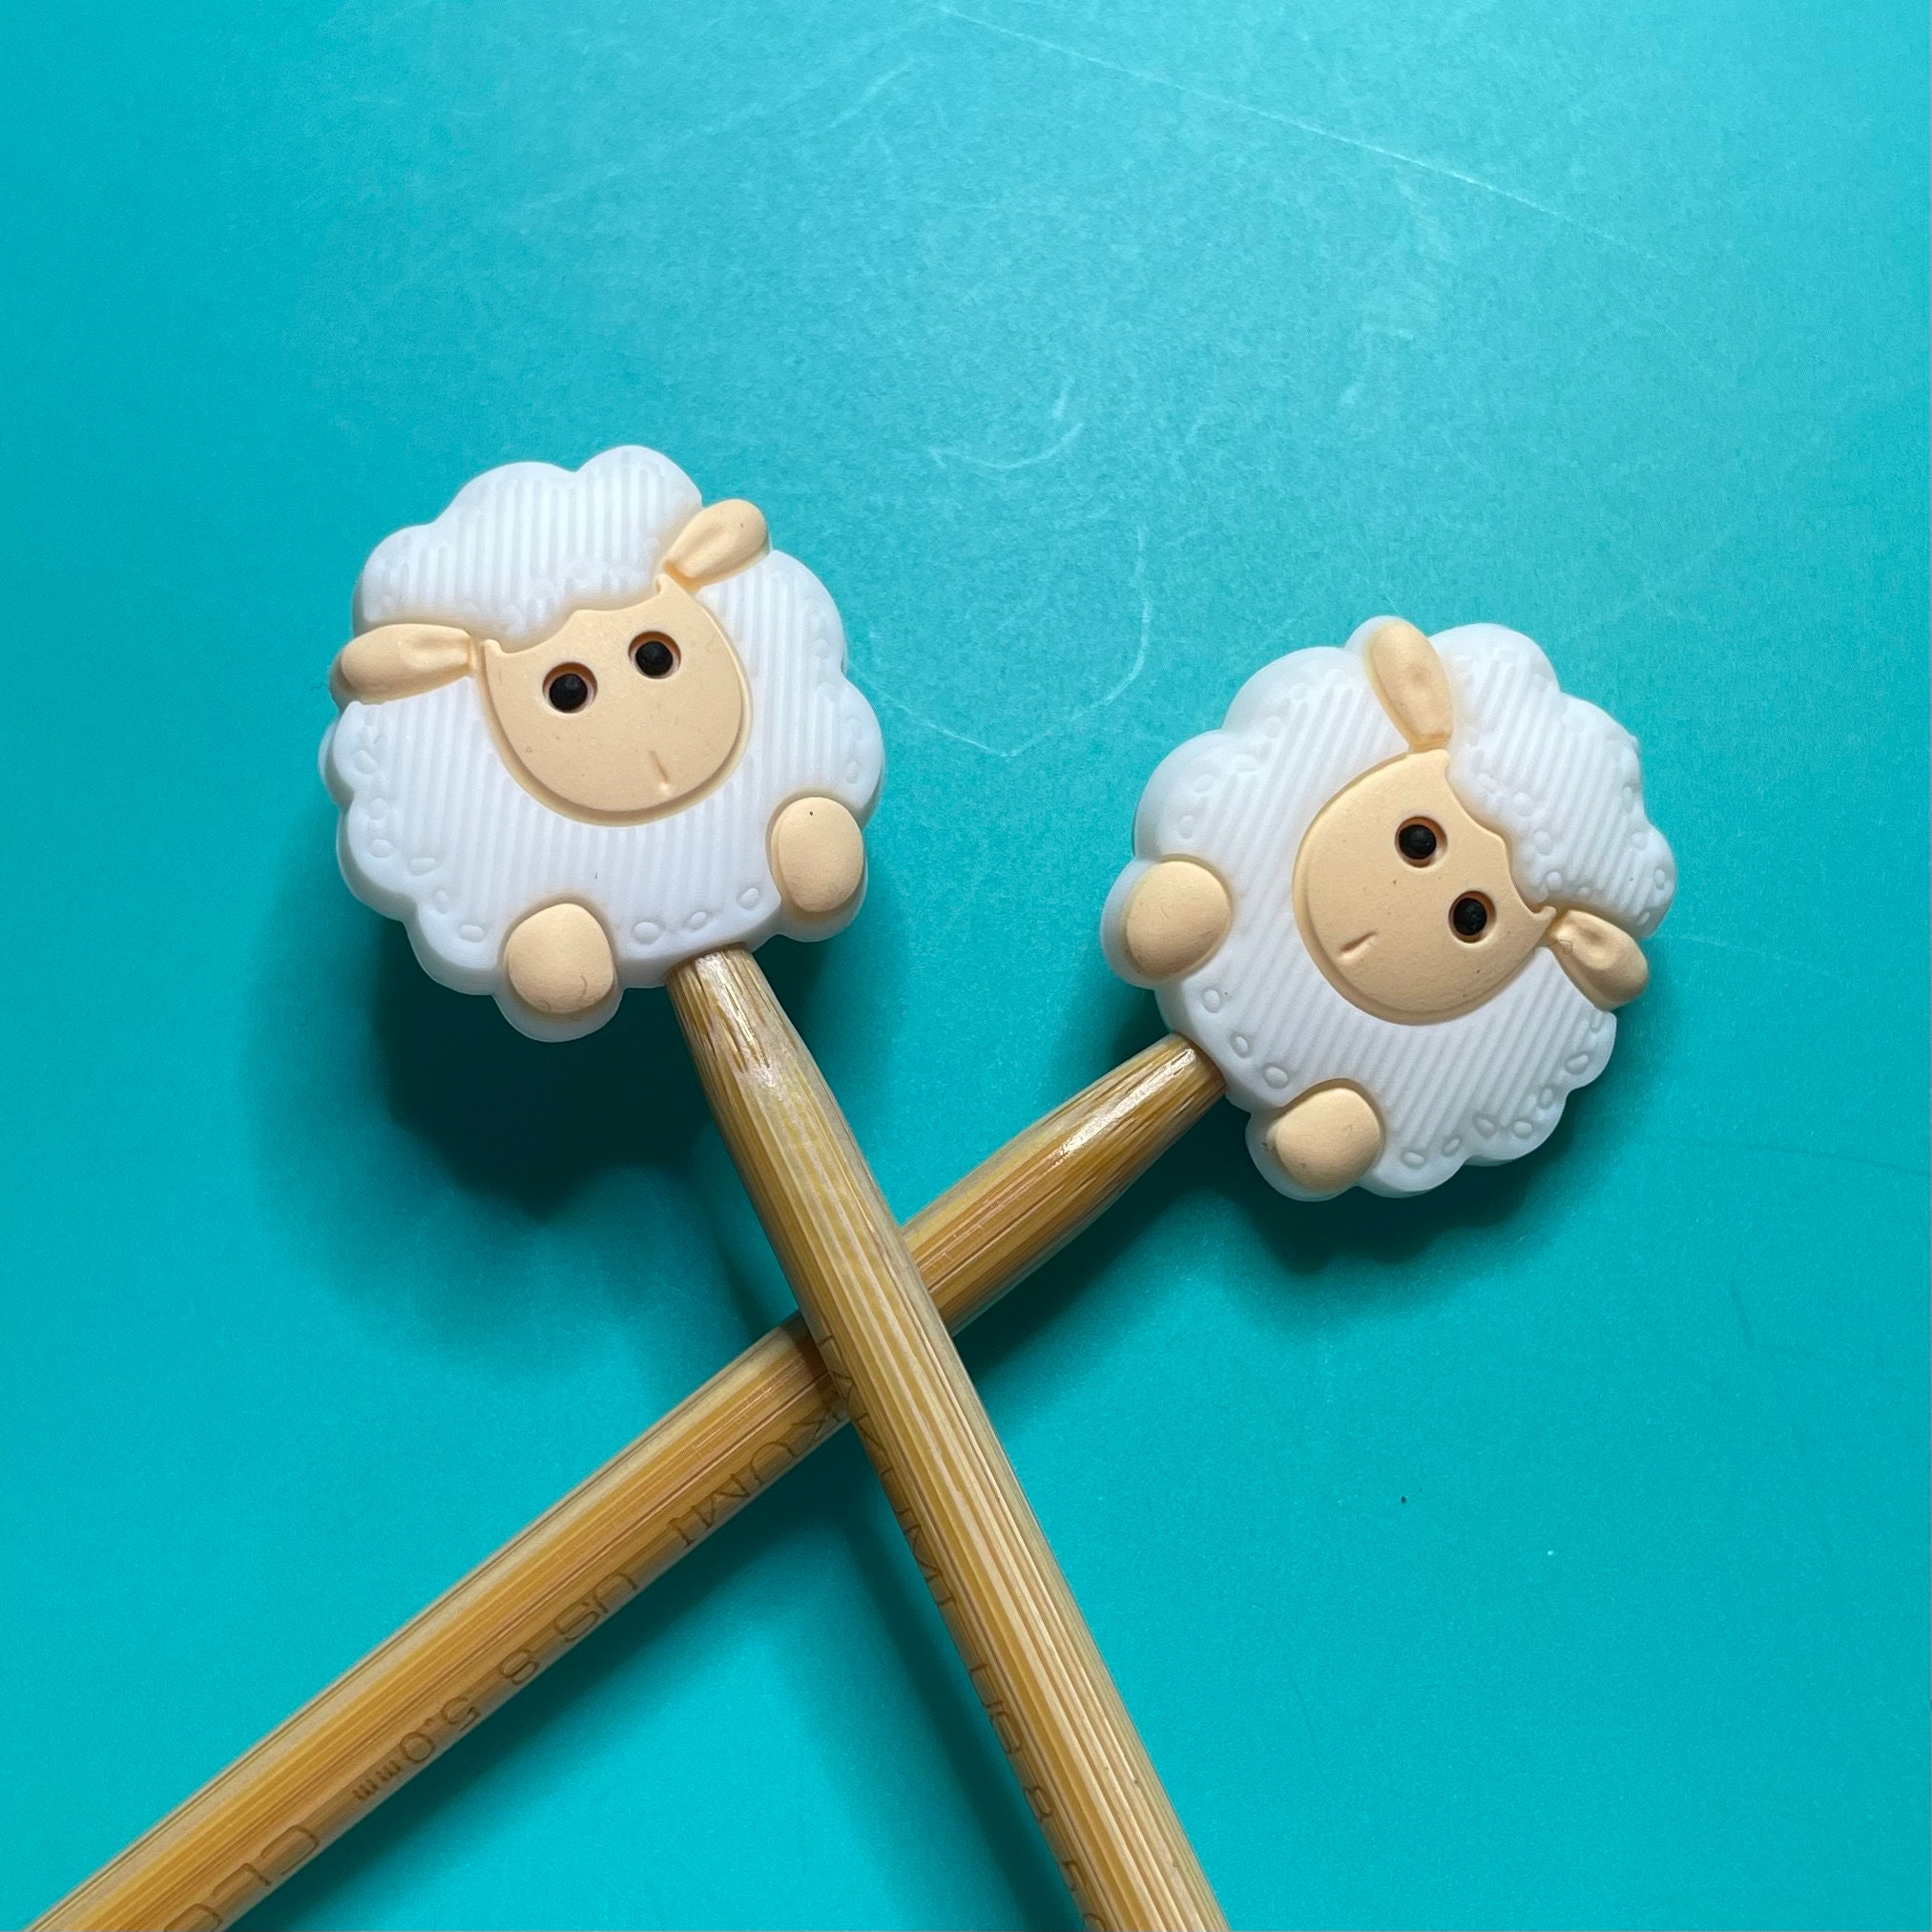 Size 8 US Bamboo Knitting Needles with Sheep Toppers